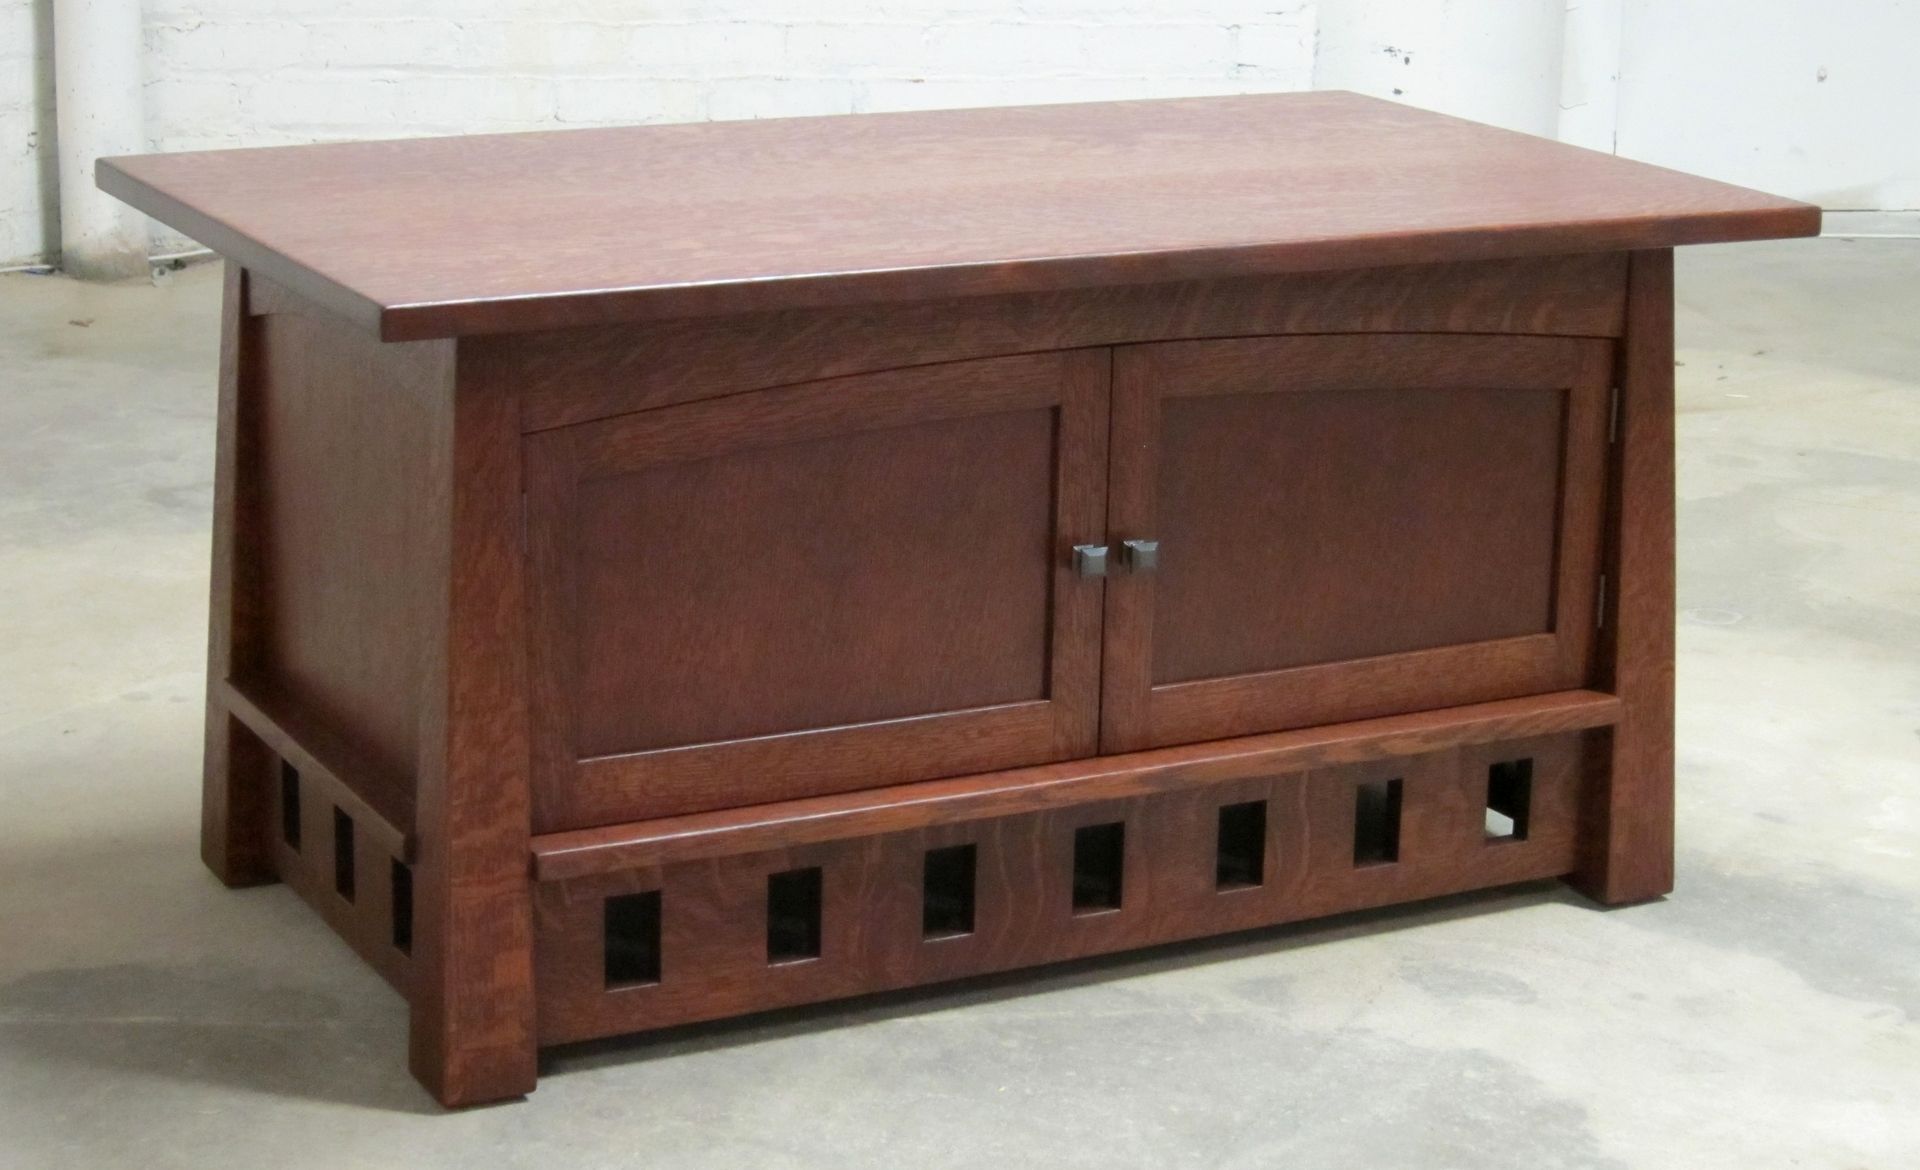 Handmade Arts And Crafts Pagoda Coffee Table And Blanket Chest throughout Coffee Table With Blanket Storage